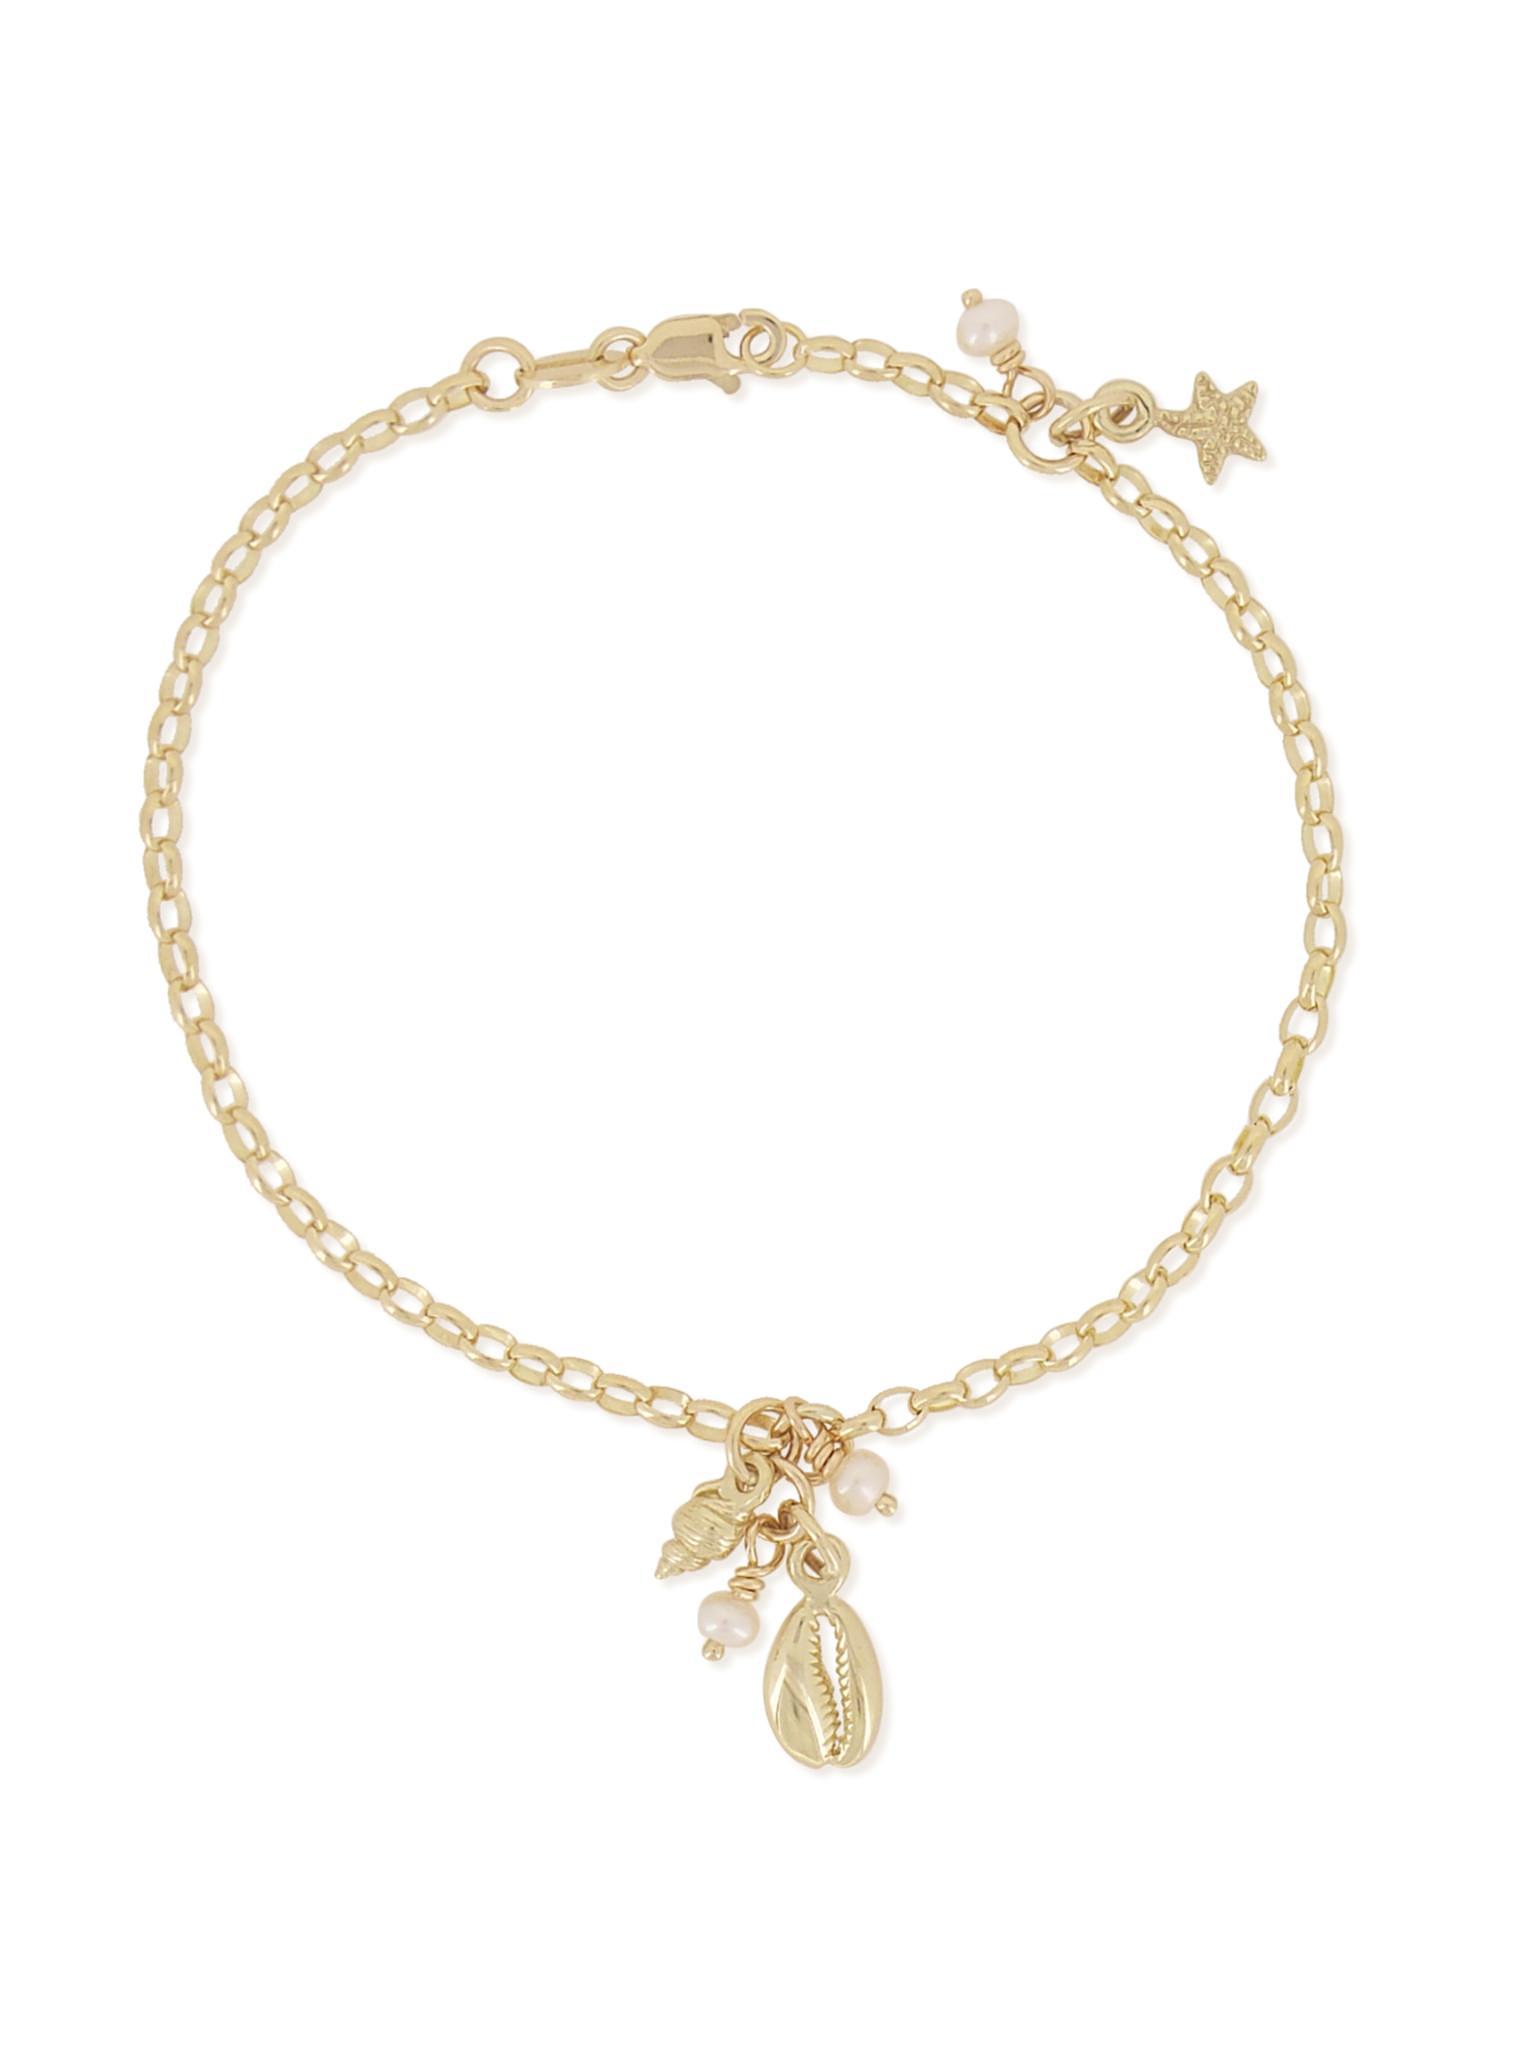 Snail Seashell Charms Bracelet in Solid Gold  Tales In Gold